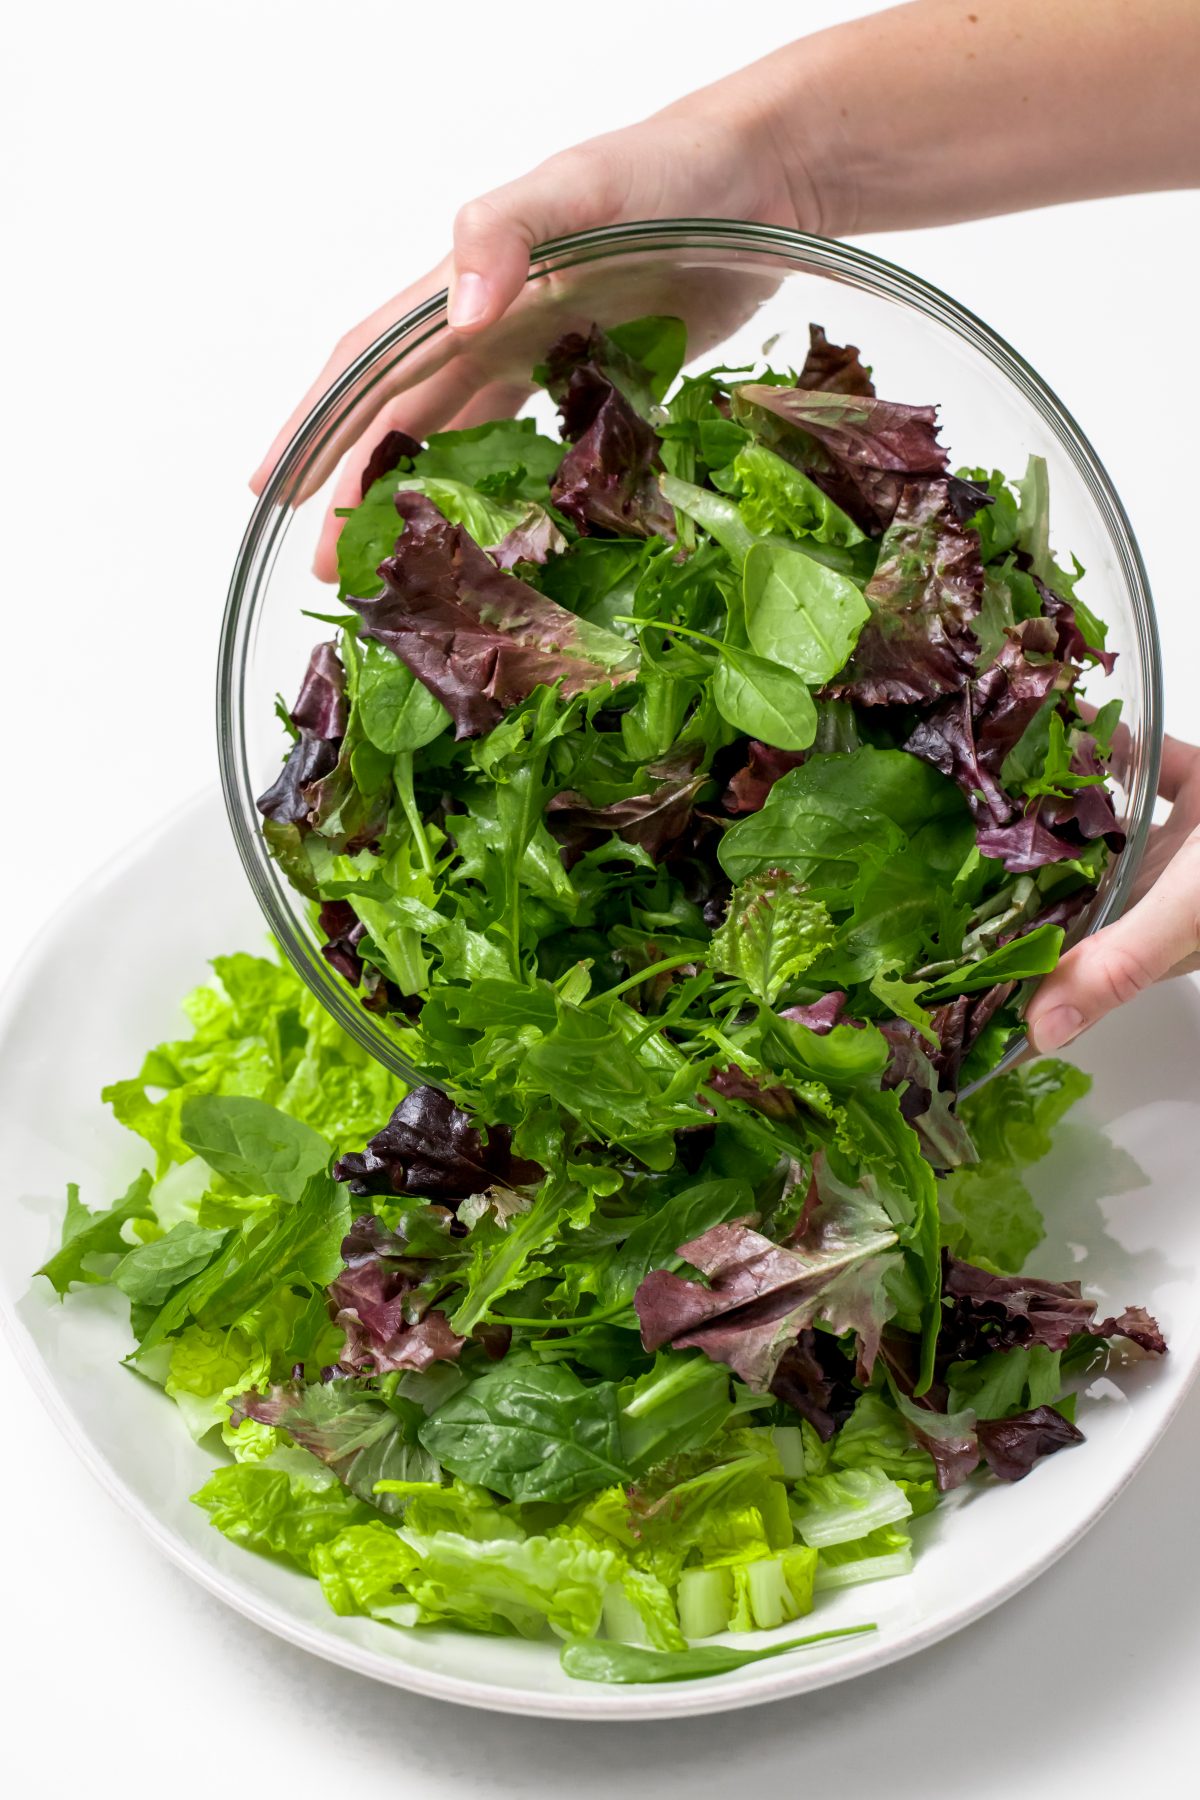 Add mixed field greens to leafy romaine